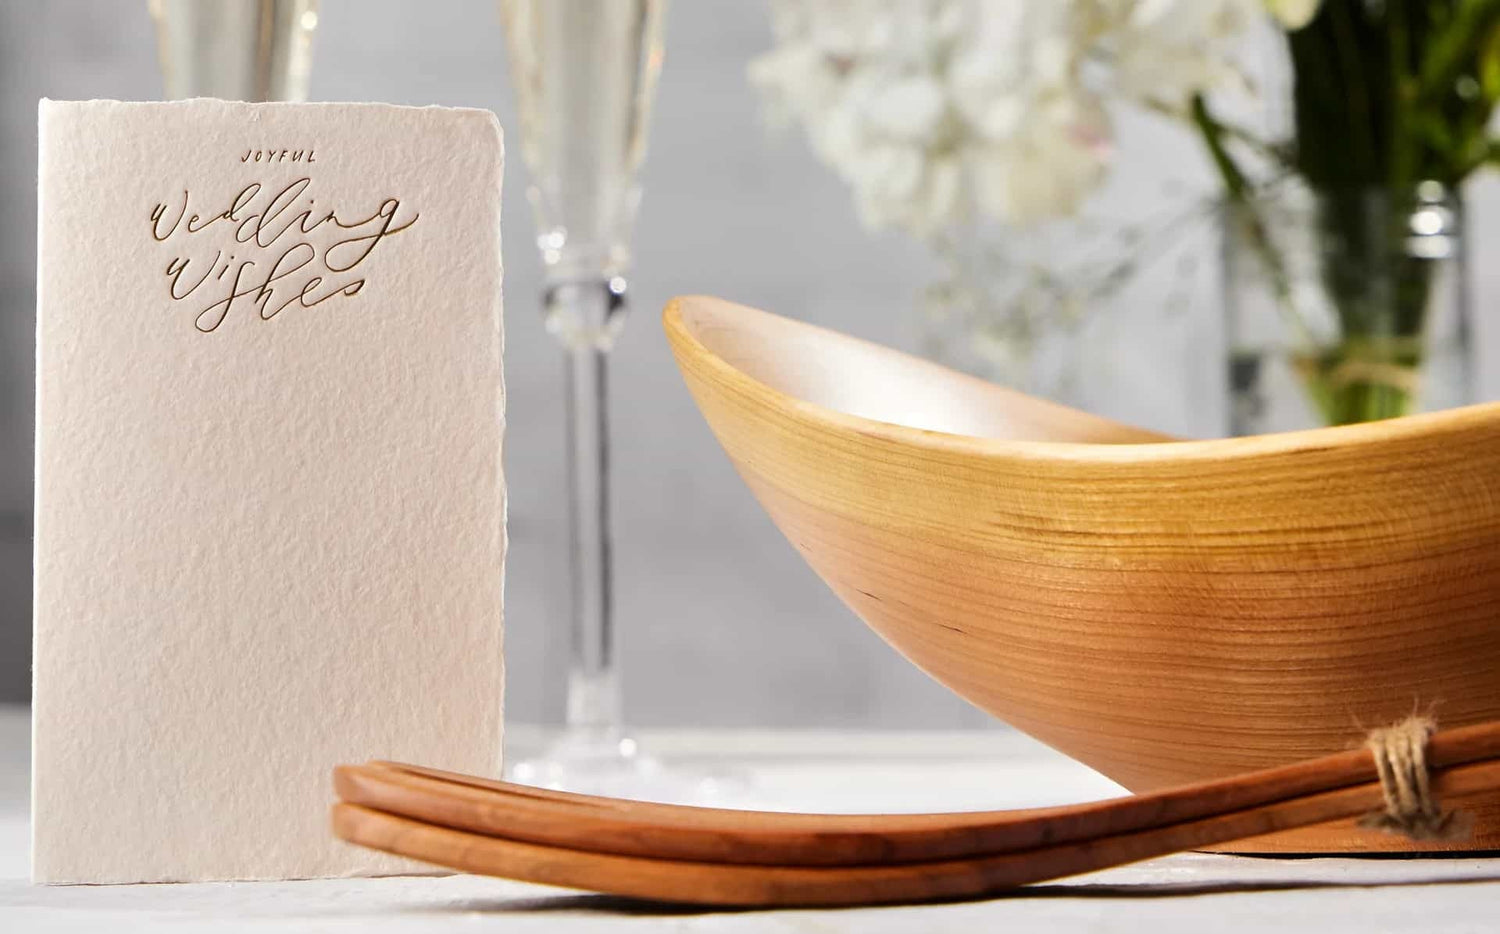 Best Wedding gifts are wooden salad bowls with matching wooden salad servers from Andrew Pearce Bowls in Hartland VT